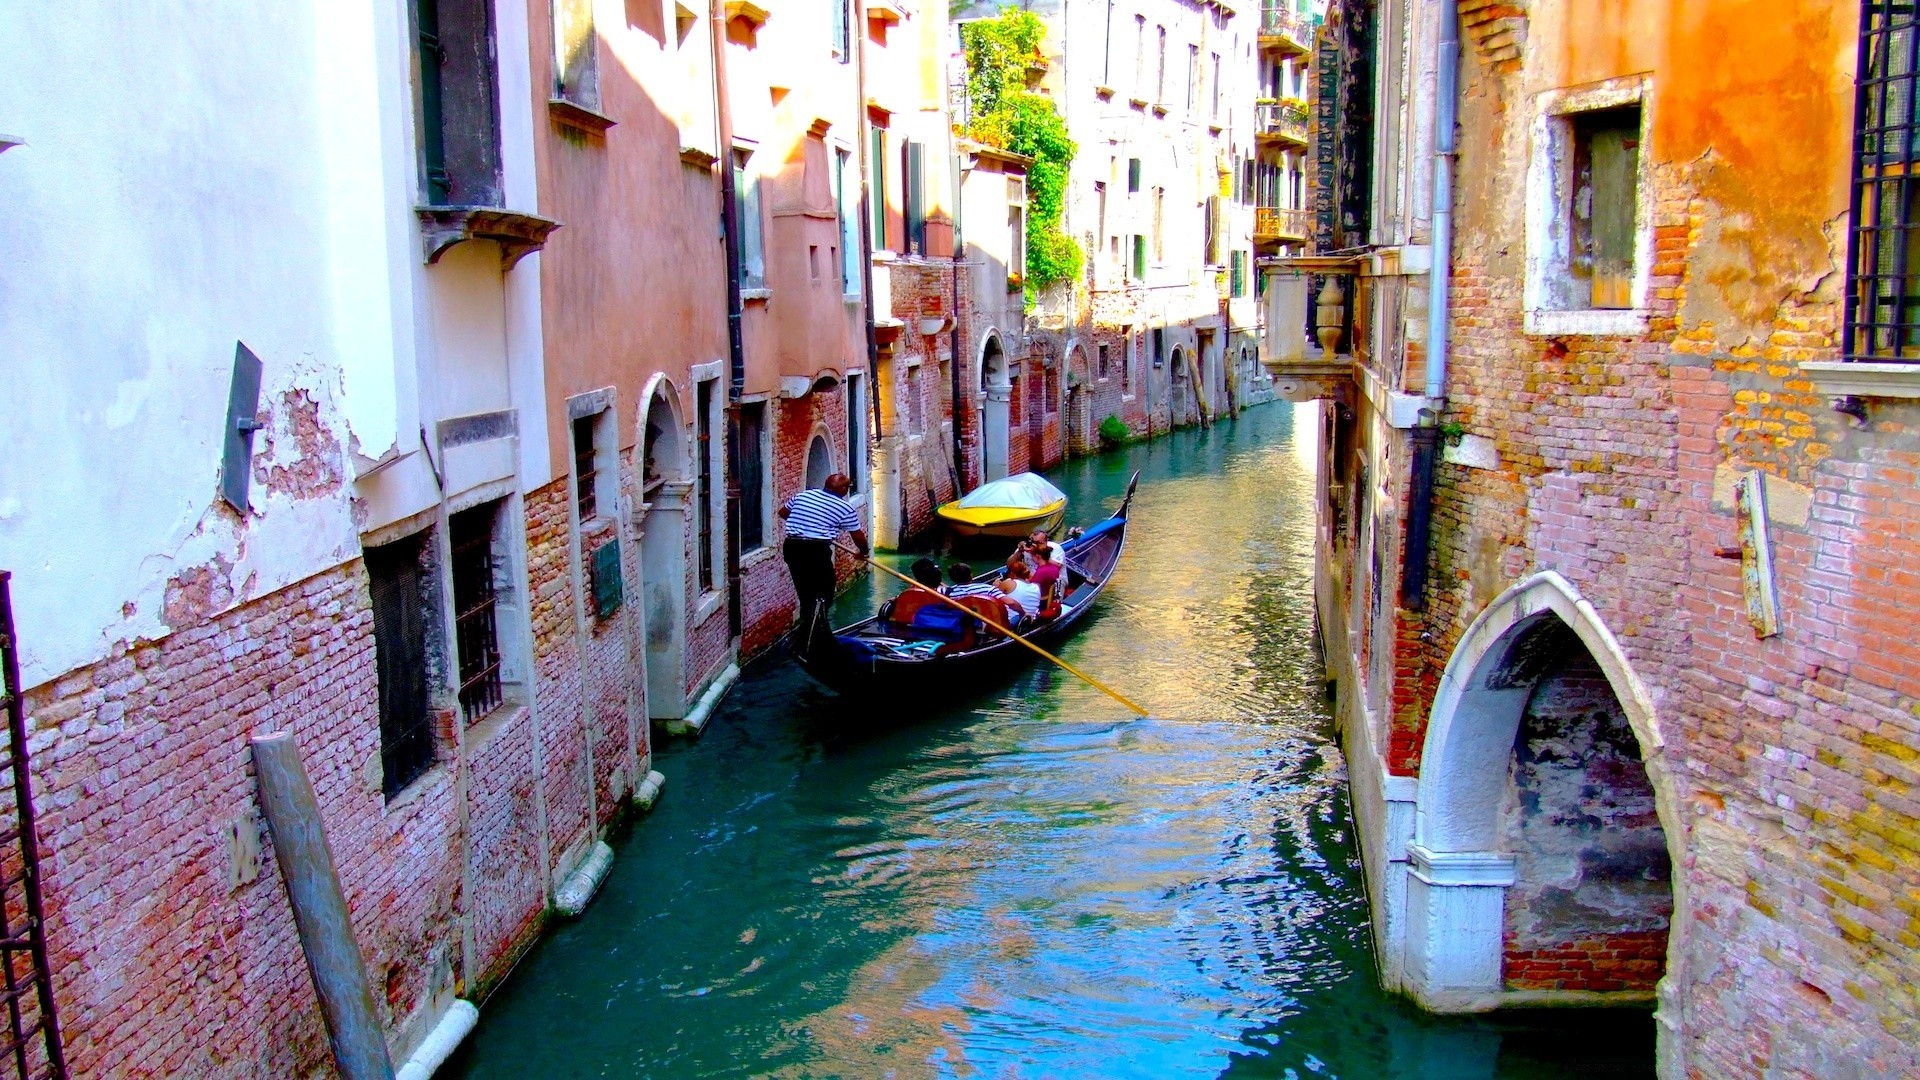 europe canal gondola venetian street water house architecture boat old travel city urban traditional reflection gondolier town building vacation outdoors